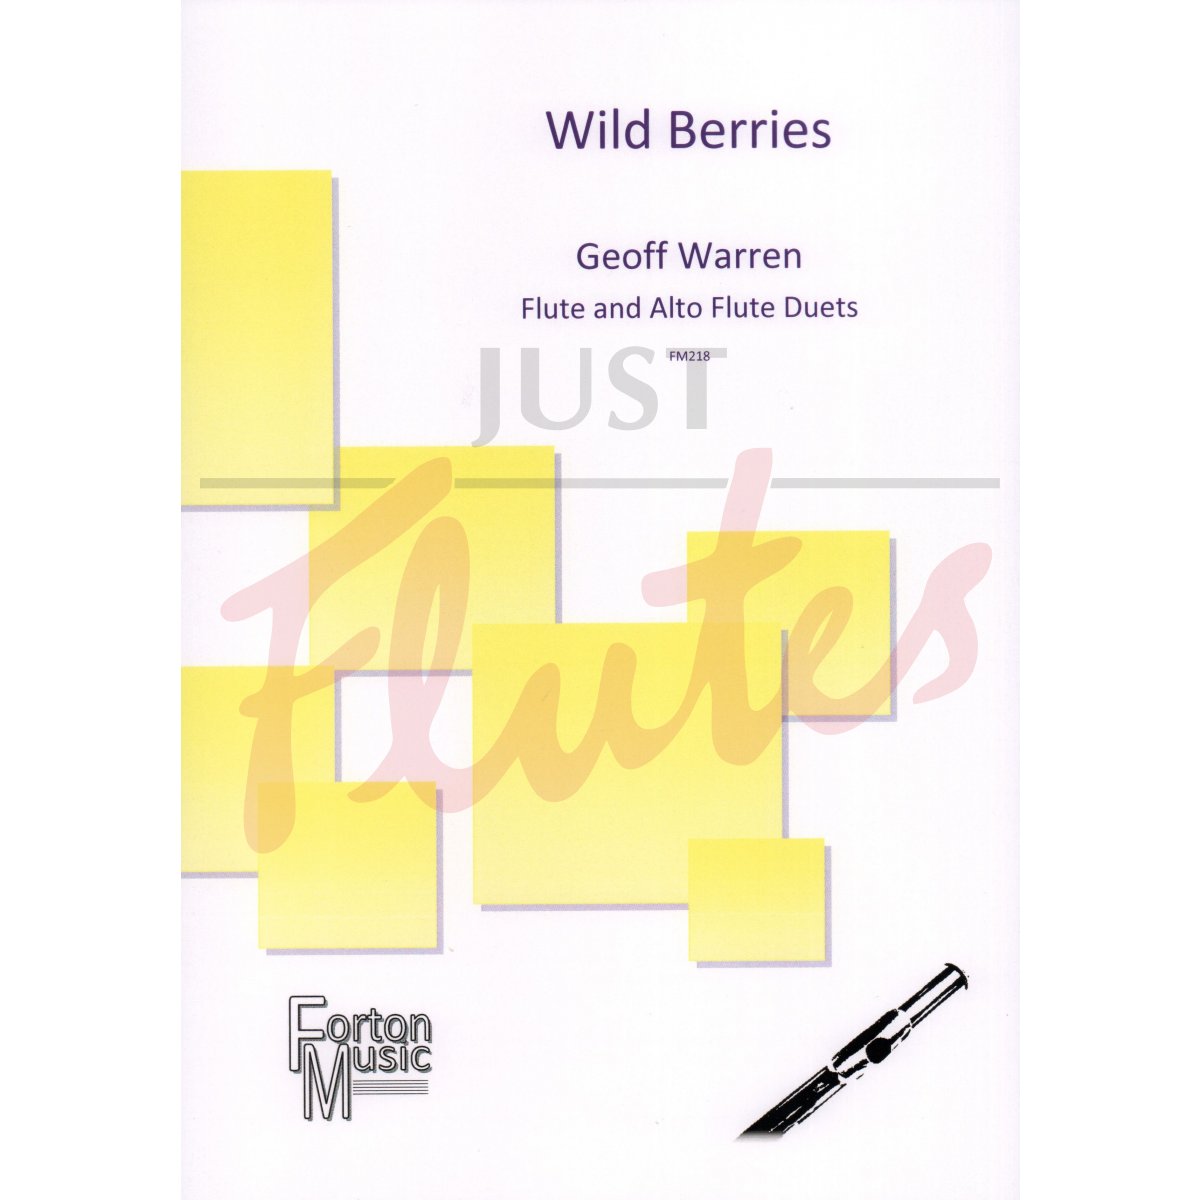 Wild Berries: Flute and Alto Flute Duets